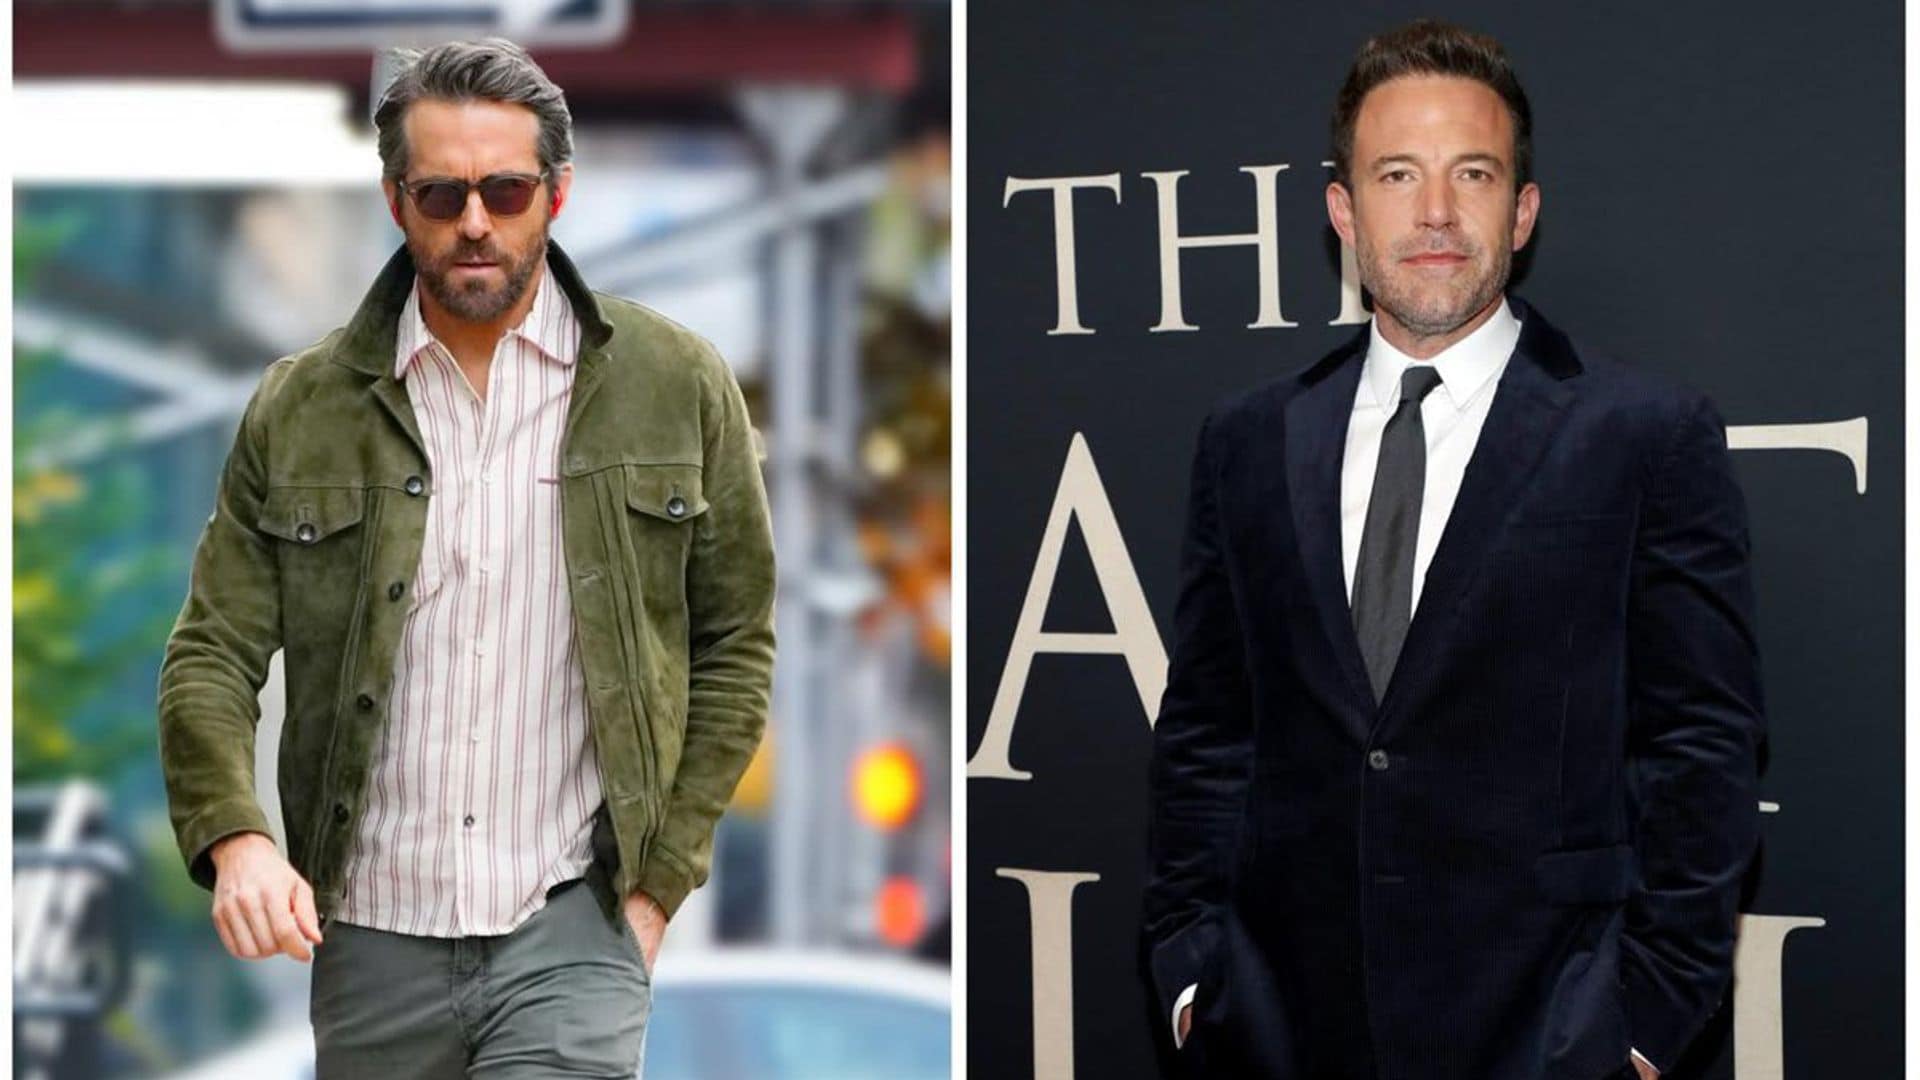 An NYC pizza shop thinks Ryan Reynolds is Ben Affleck...and he’s not going to correct them